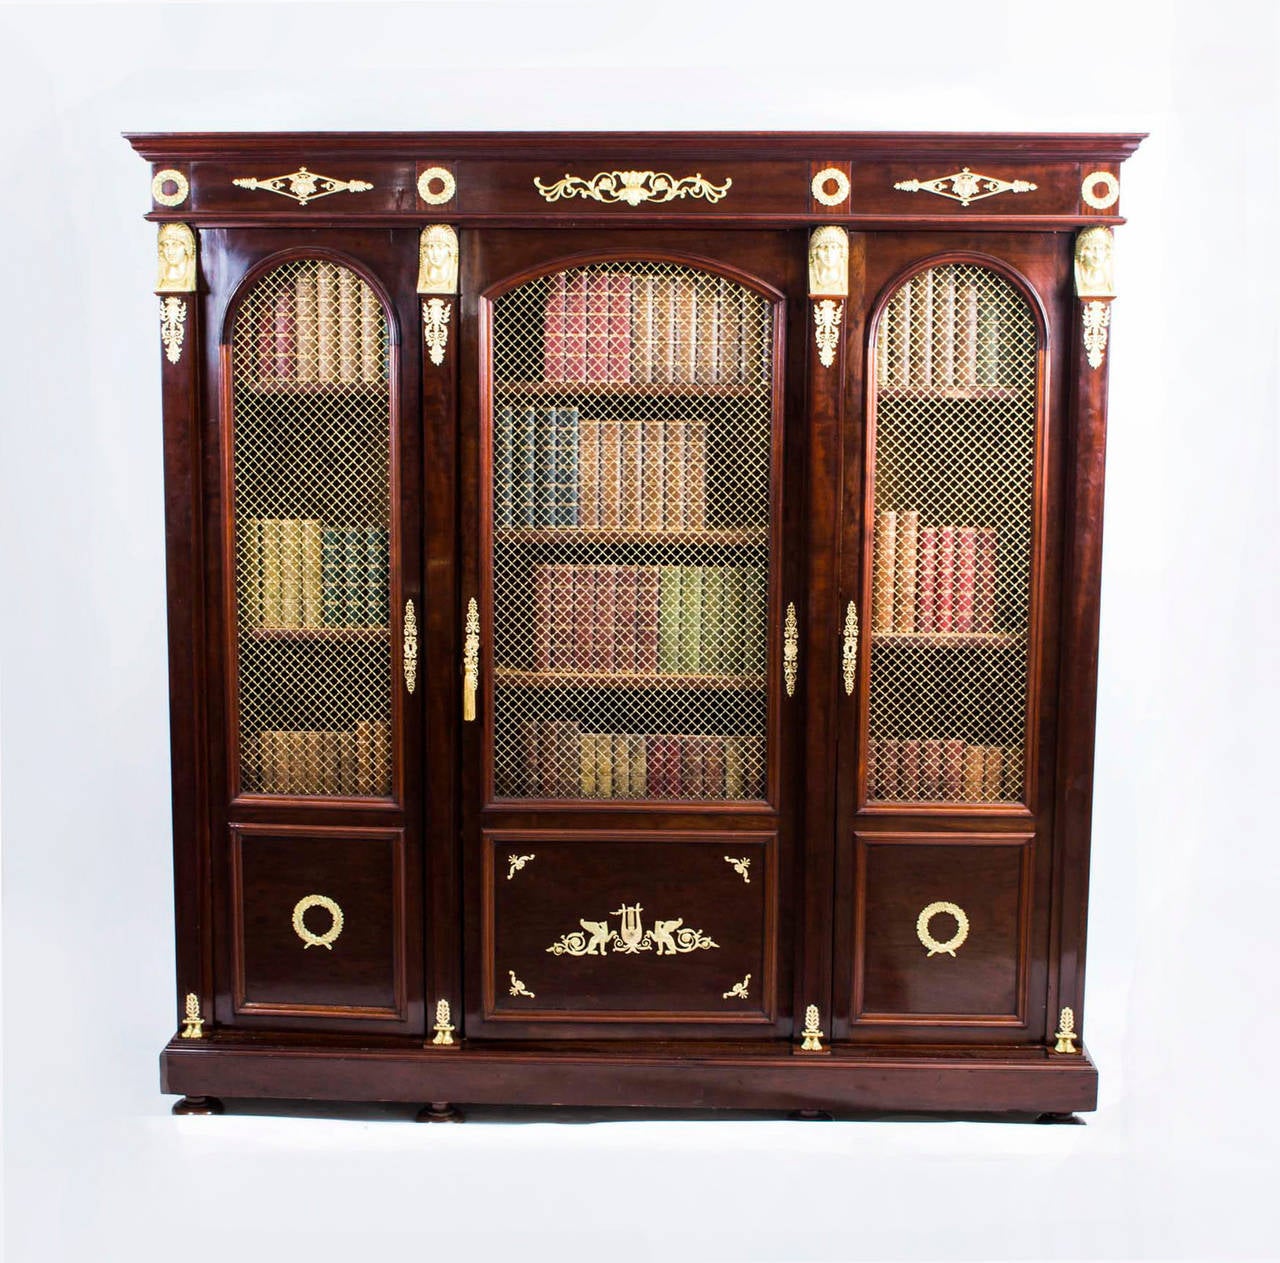 This is a beautiful antique French Empire mahogany bookcase with fabulous ormolu mounts circa 1840 in date. 

It has been crafted from solid mahogany and is smothered in fabulous ormolu mounts reminiscent of the Empire style with Egyptian motifs